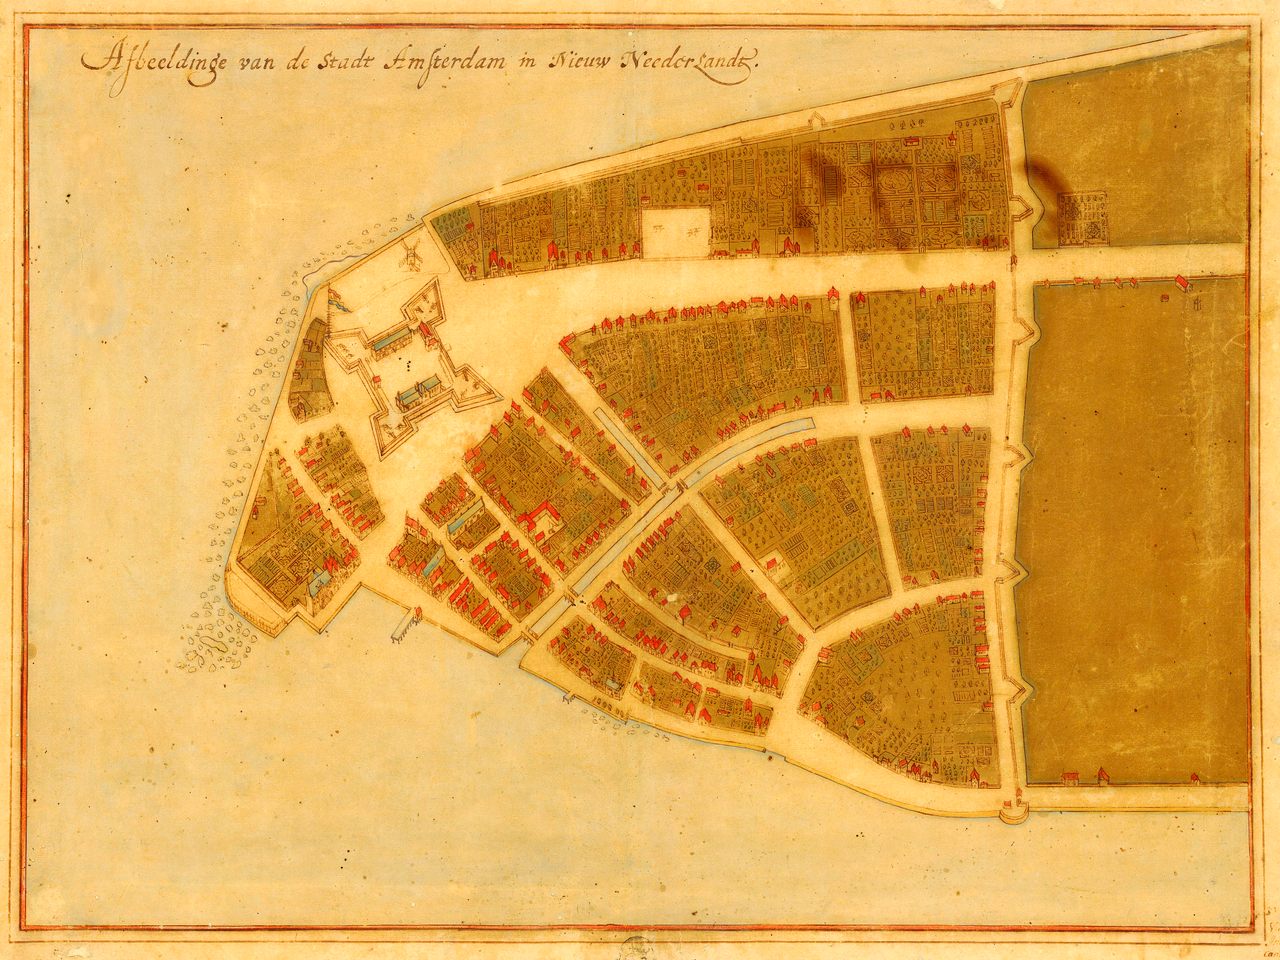 In 1660, city leaders commissioned surveyor Jacques Cortelyou to produce a drawing of the growing city at the southern tip of Mannahatta island.